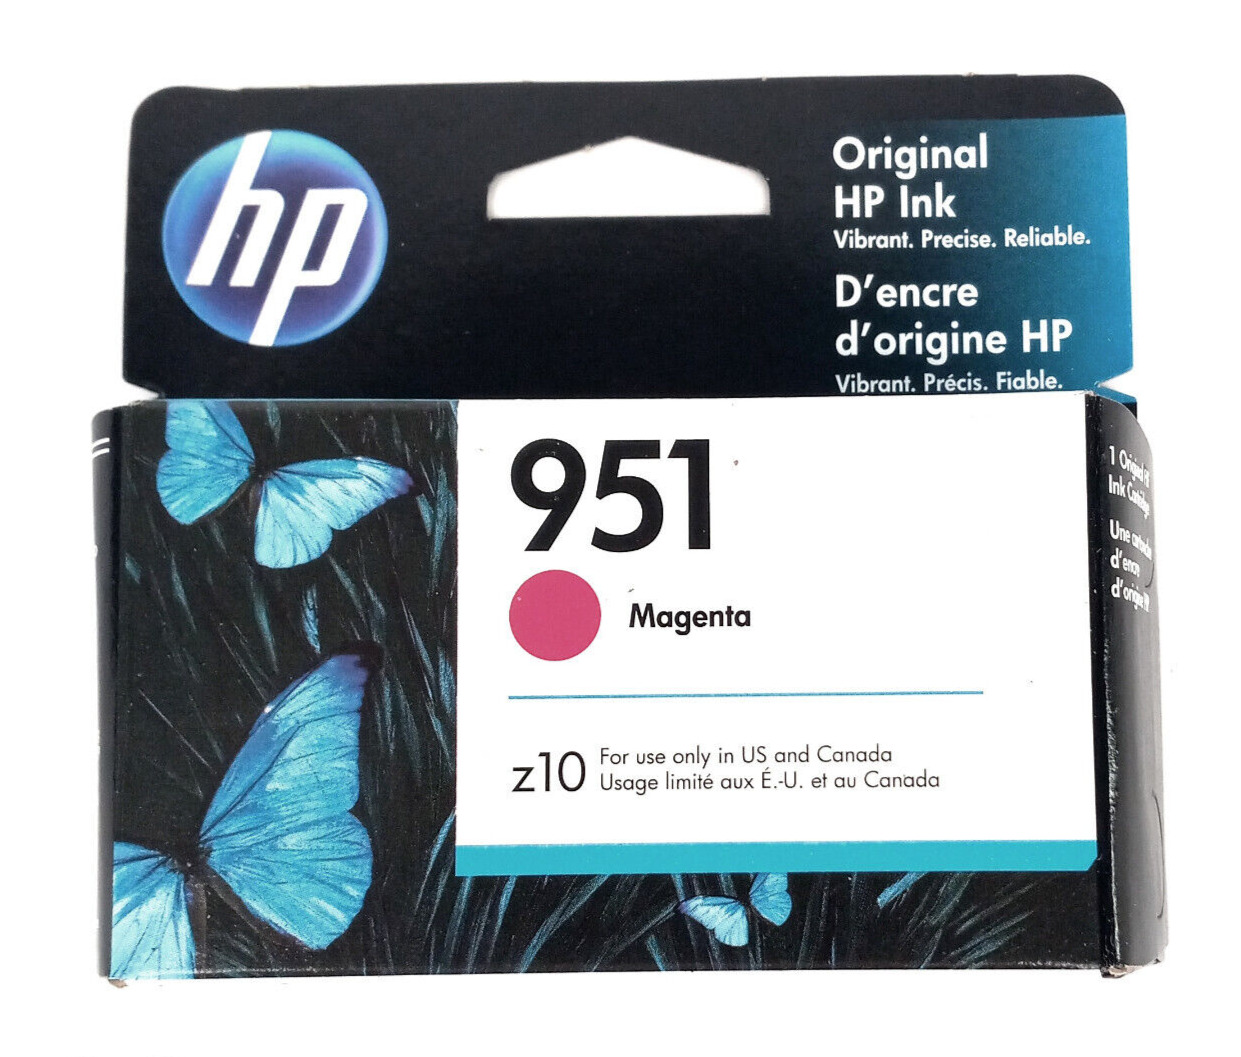 Lot of 13 NEW Genuine HP 951 Magenta Ink Cartridges (CN051AN) AUG 2016/APR 2017